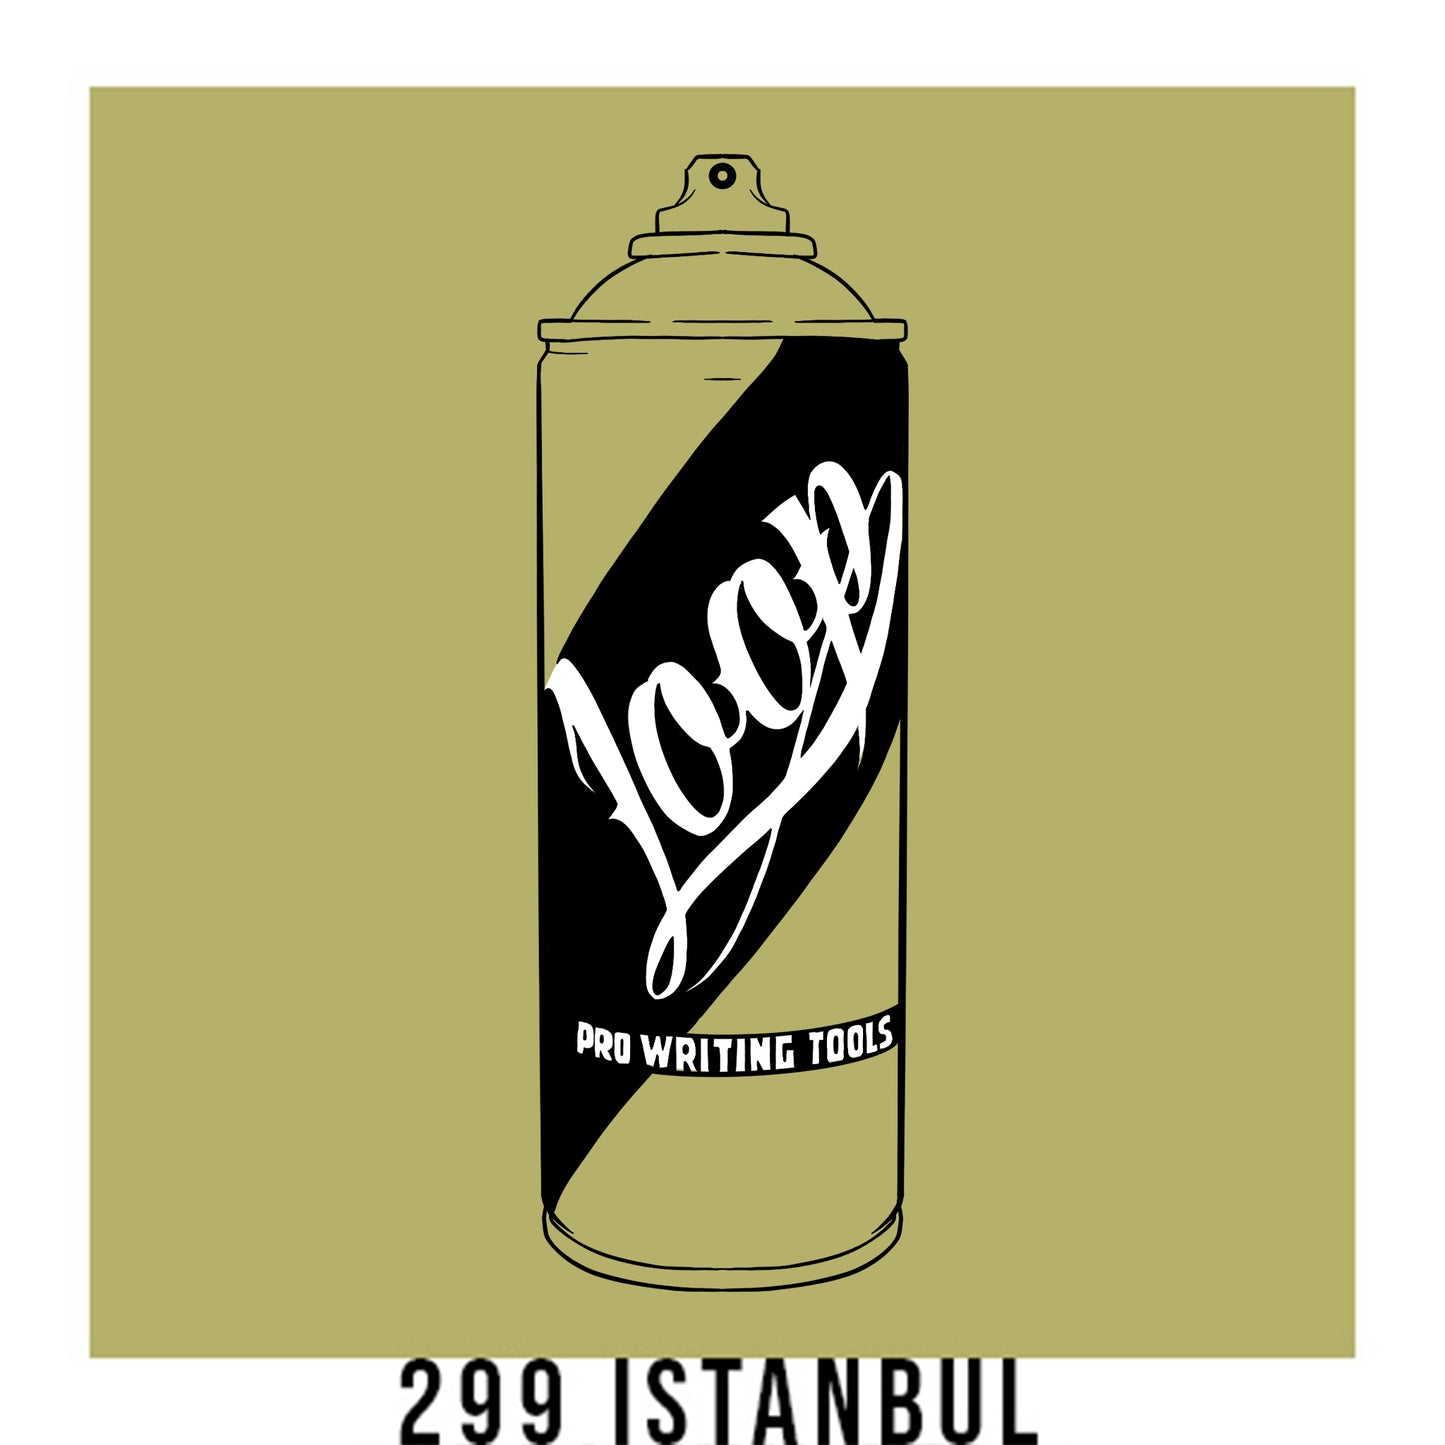 A black outline drawing of a Pastel Olive spray paint can with the word "Loop" written on the face in script. The background is a color swatch of the same Pastel Olive with a white border with the words "299 Istanbul" at the bottom.